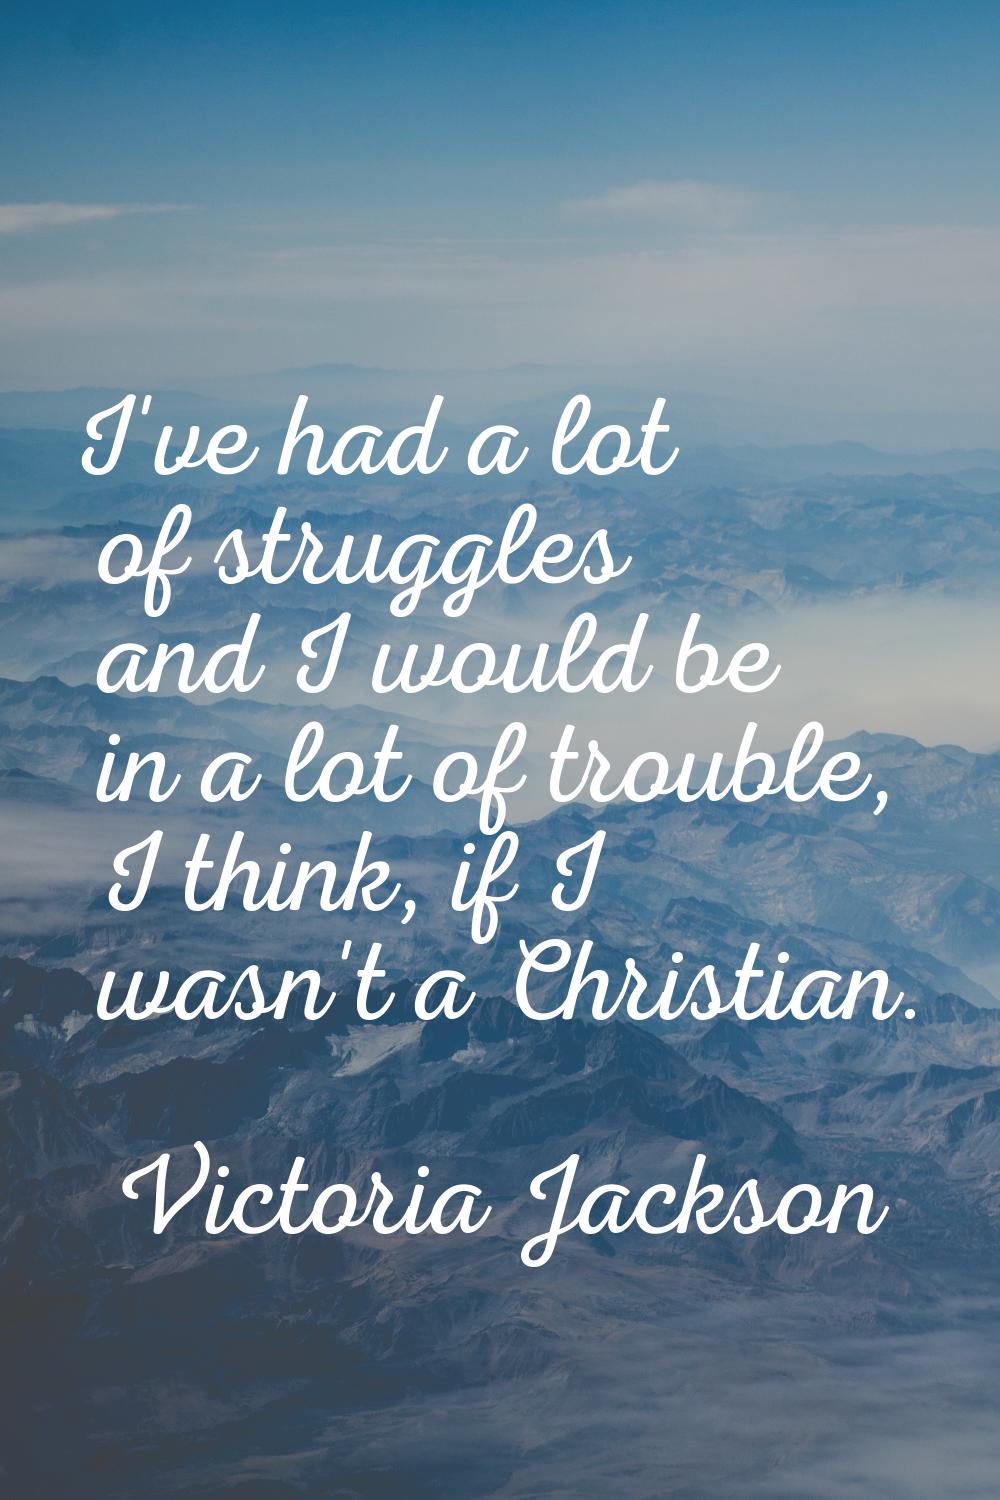 I've had a lot of struggles and I would be in a lot of trouble, I think, if I wasn't a Christian.